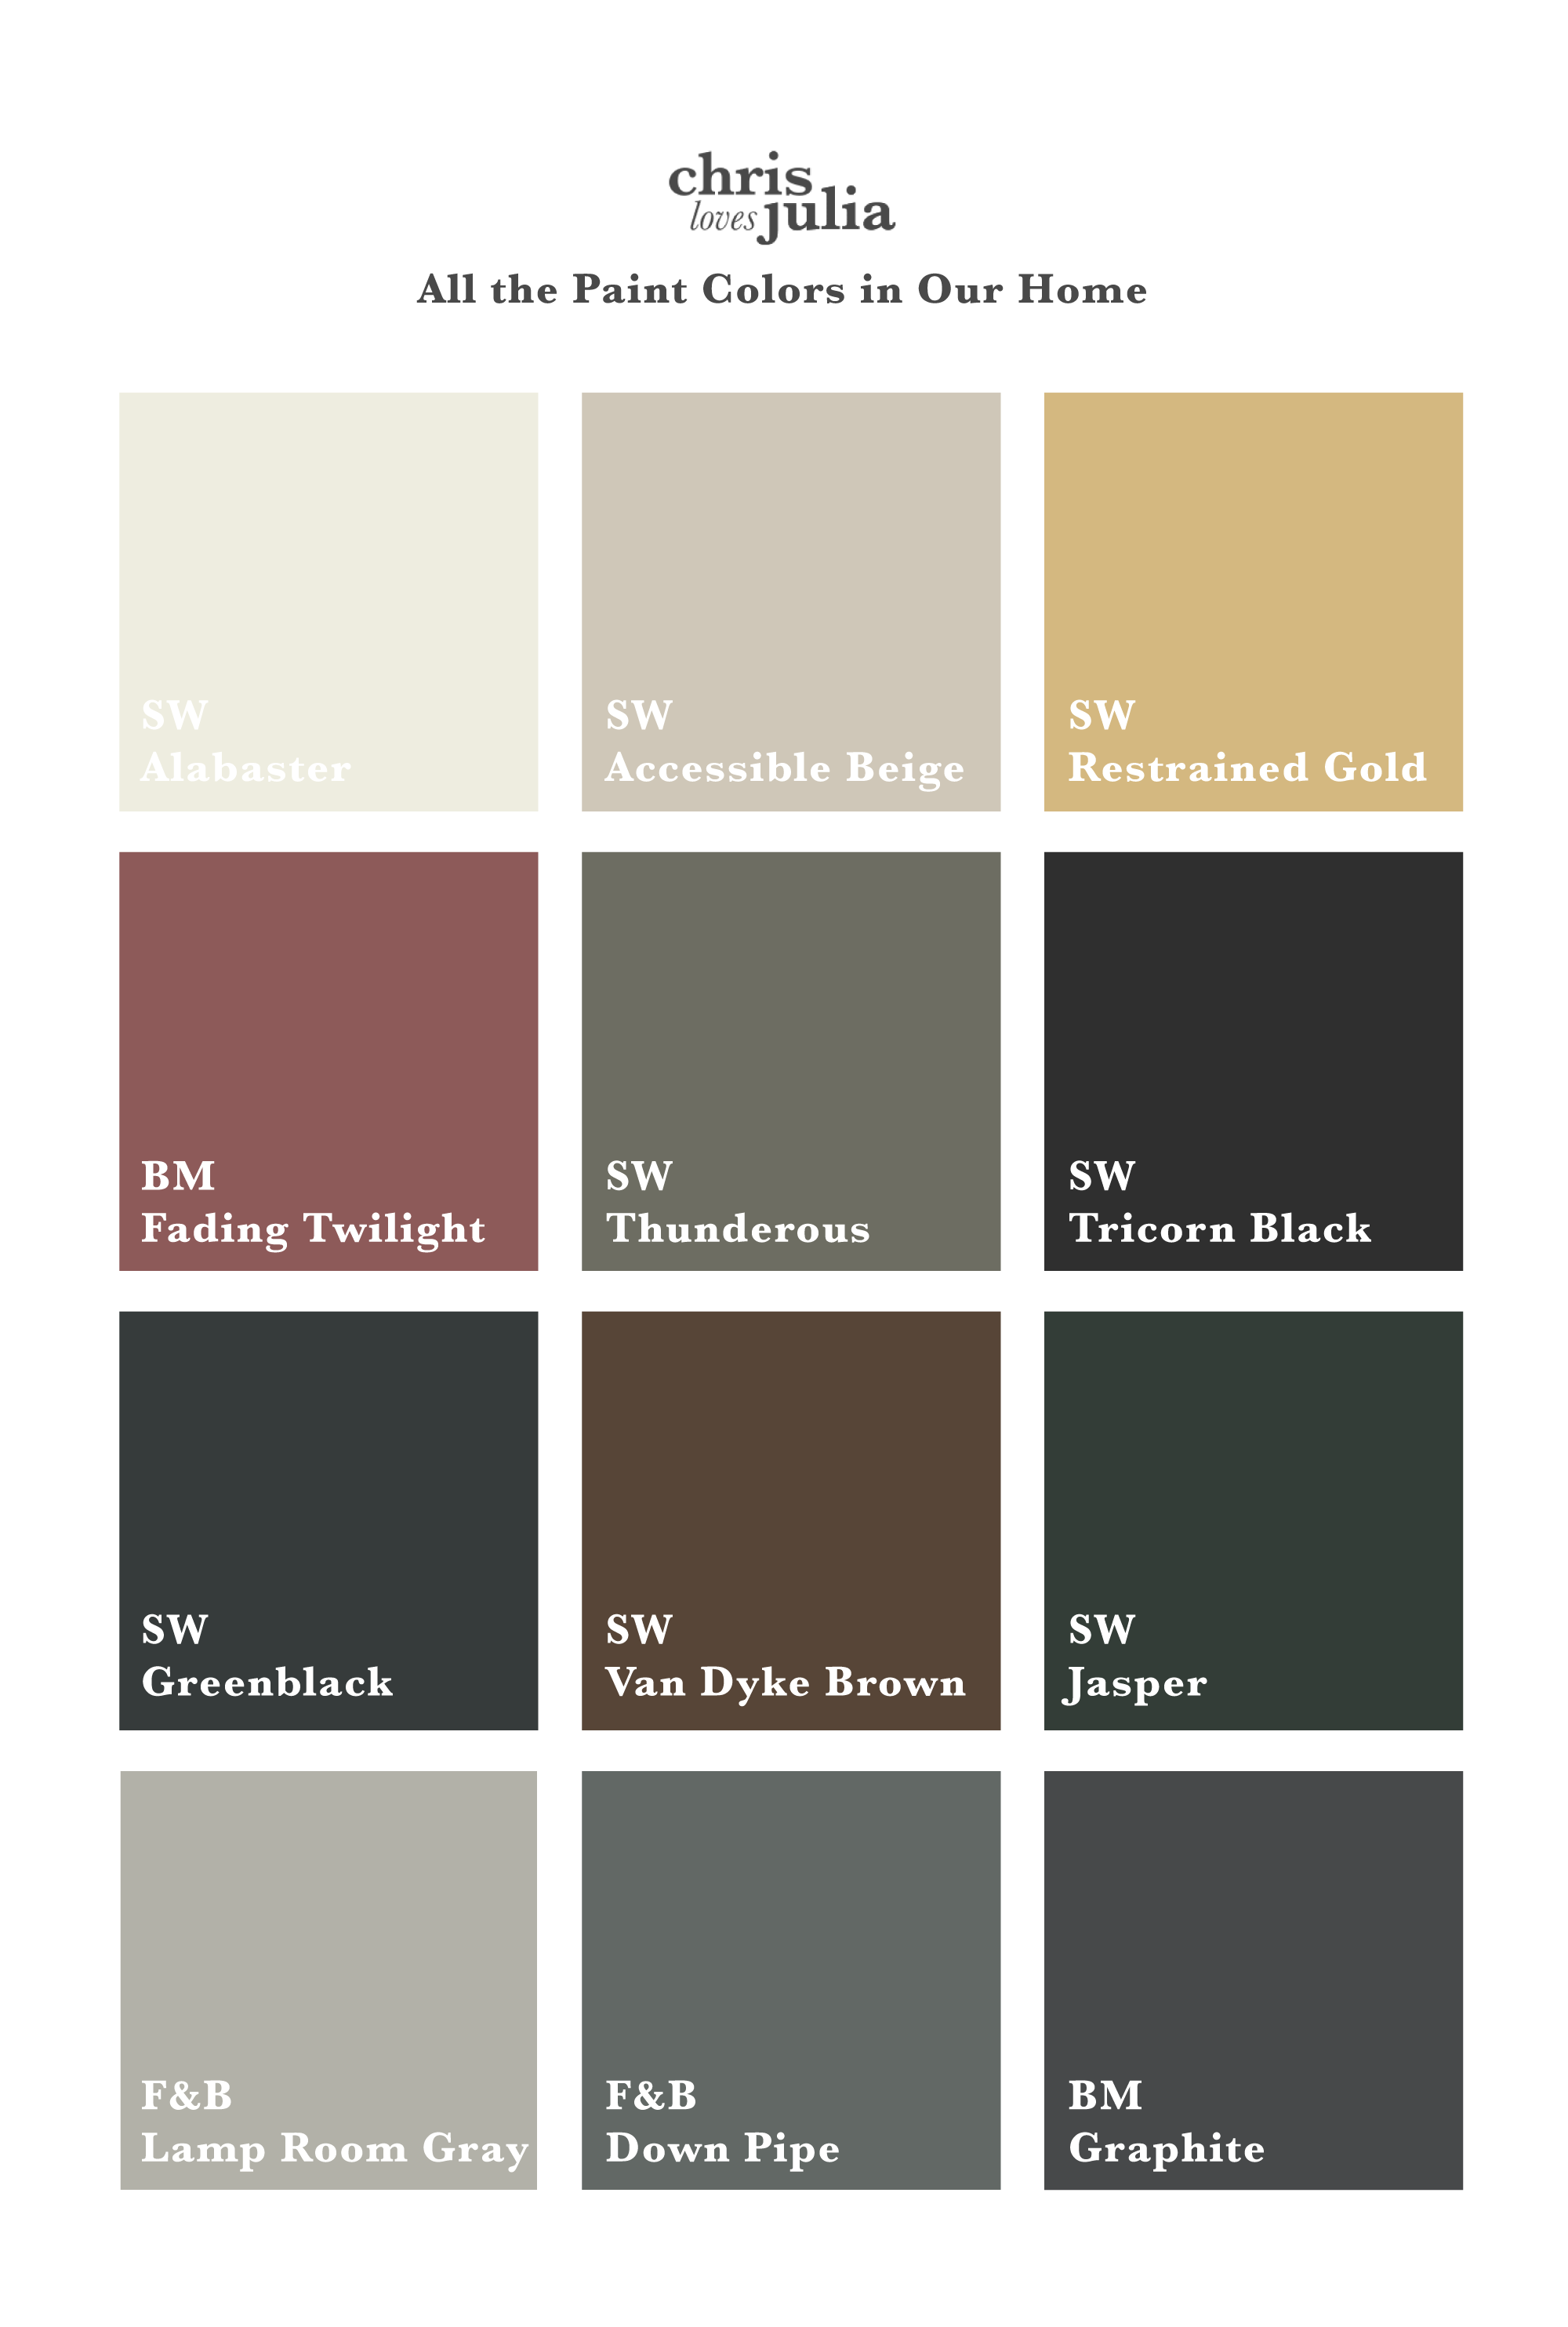 How I Create A Home Color Palette All The Paint Colors In Our Home So Far Chris Loves Julia